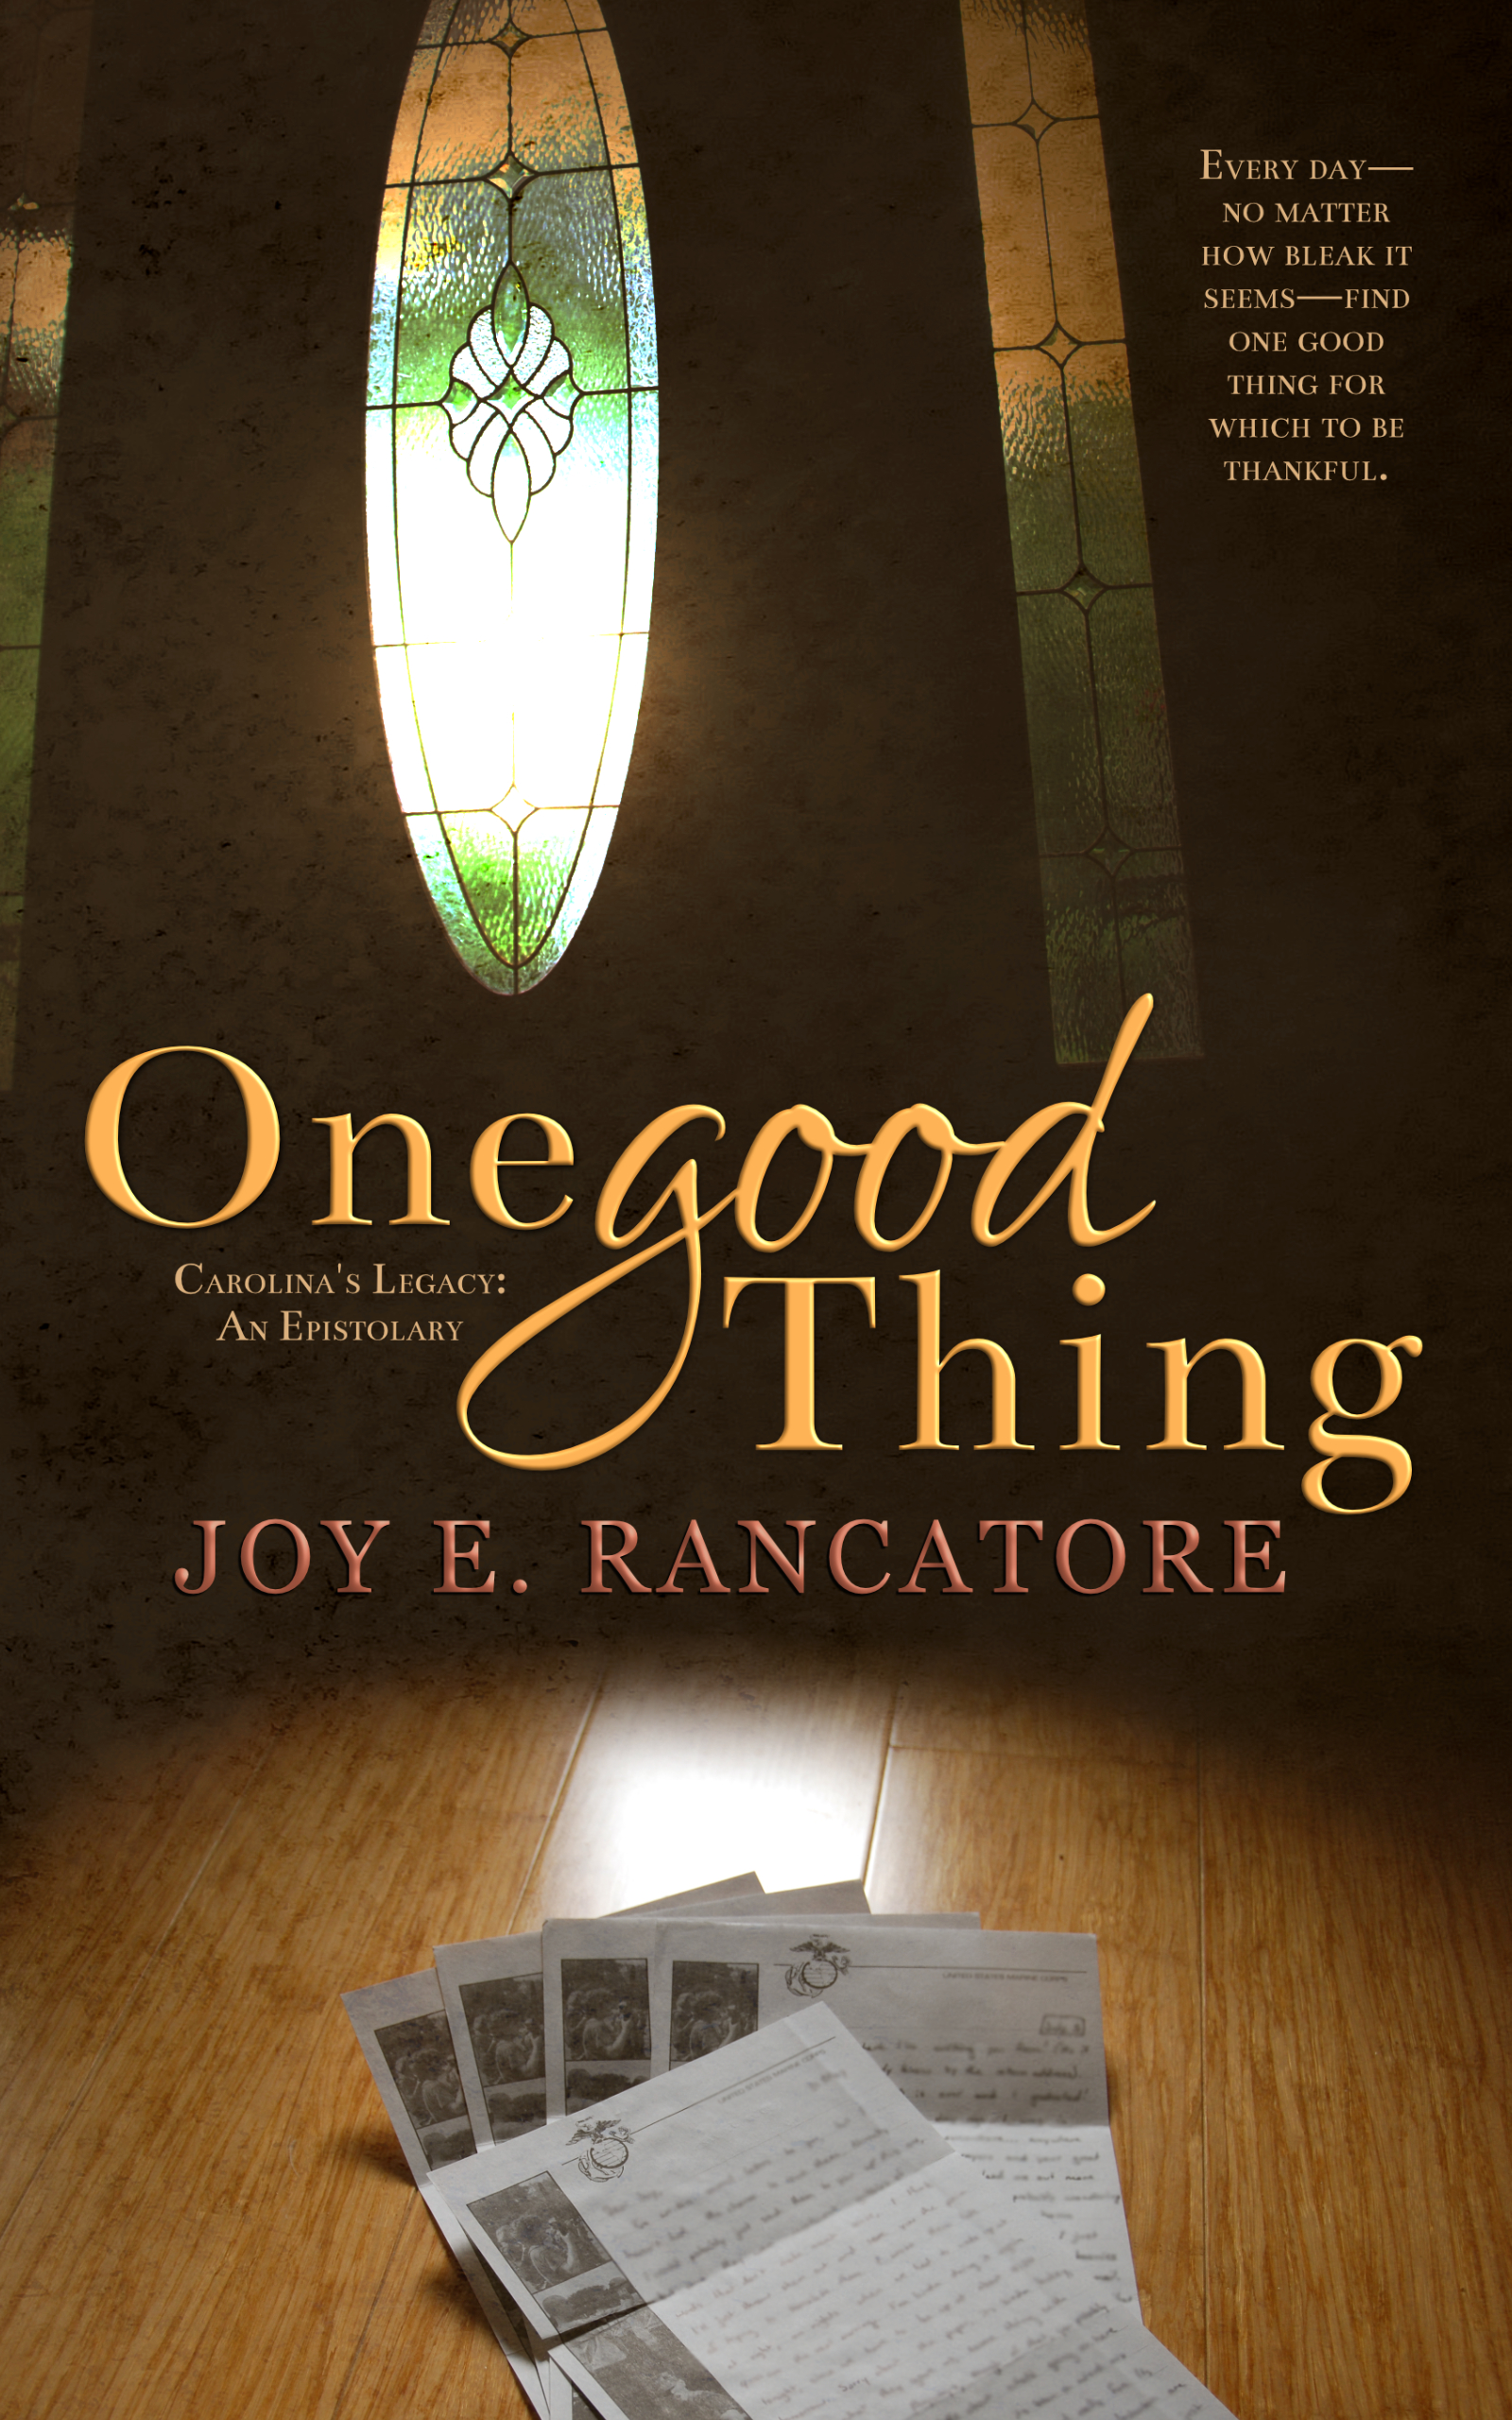 One Good Thing, an epistolary by Joy E. Rancatore, rounds out Carolina's Legacy Collection.